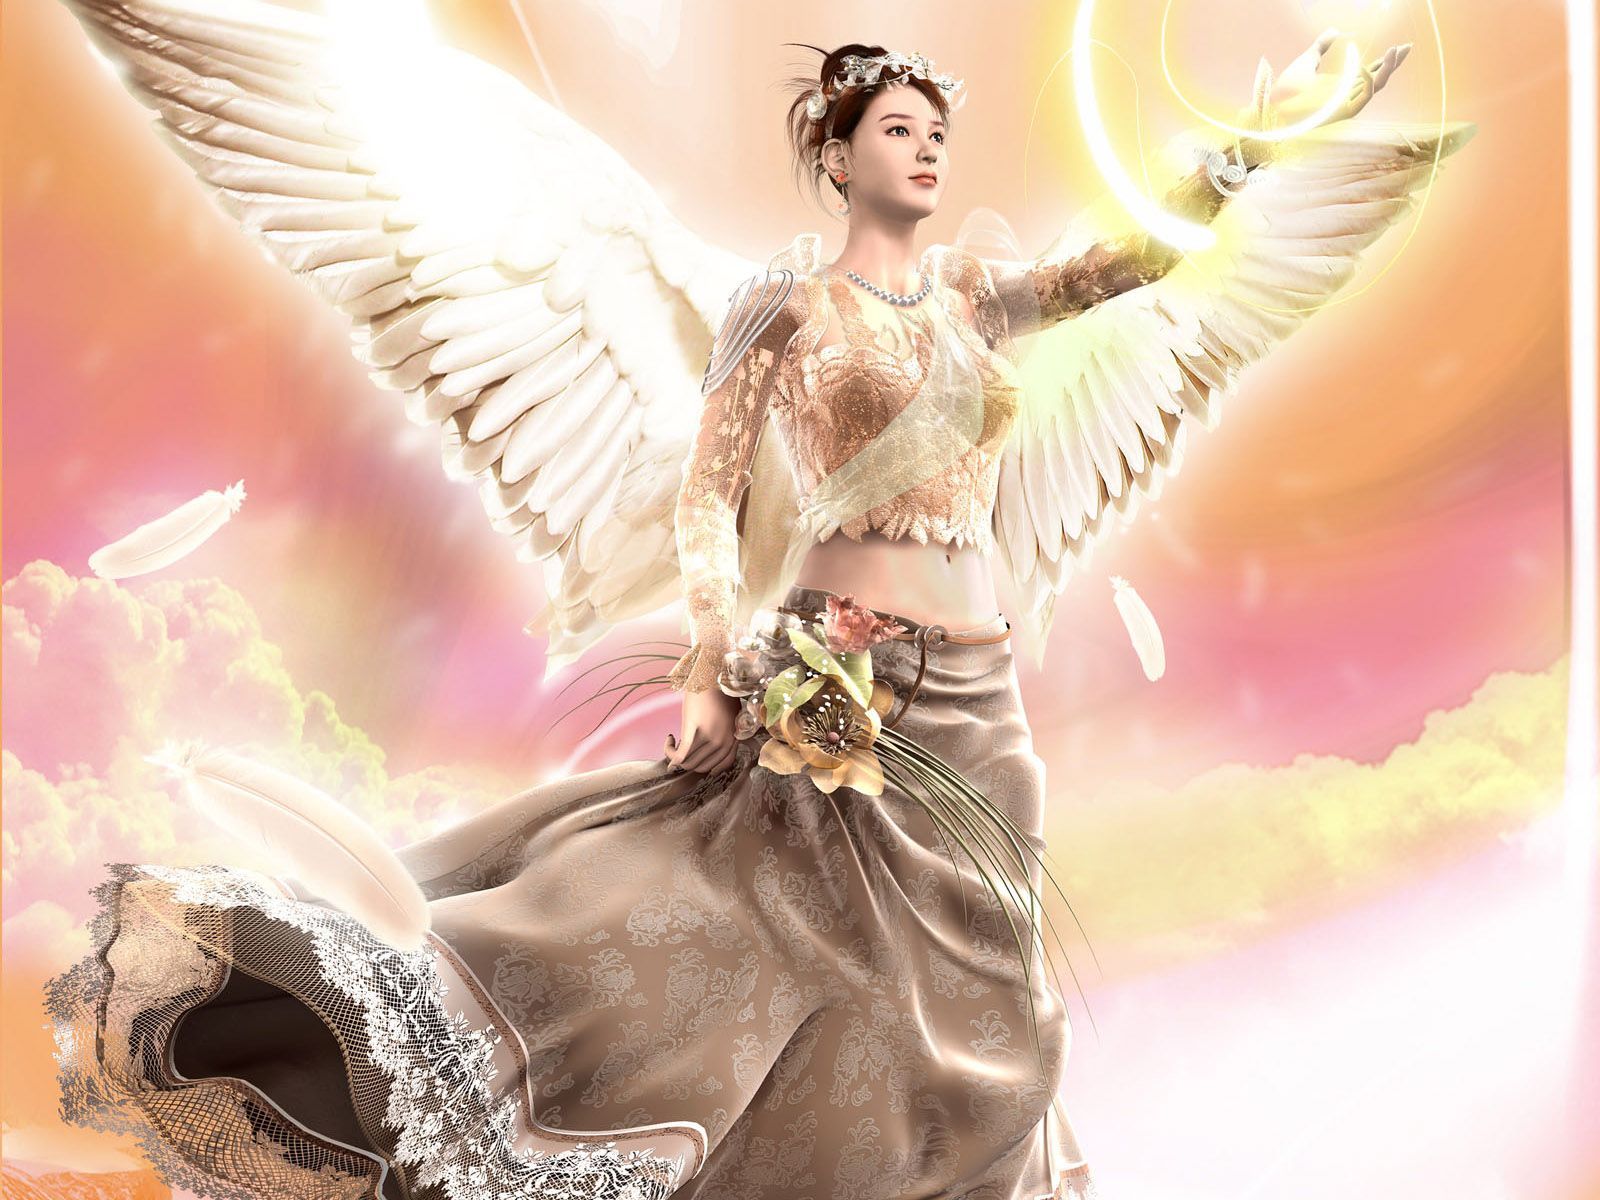 57200 Beautiful Angel Stock Photos Pictures  RoyaltyFree Images   iStock  Angels Goddess Beautiful woman